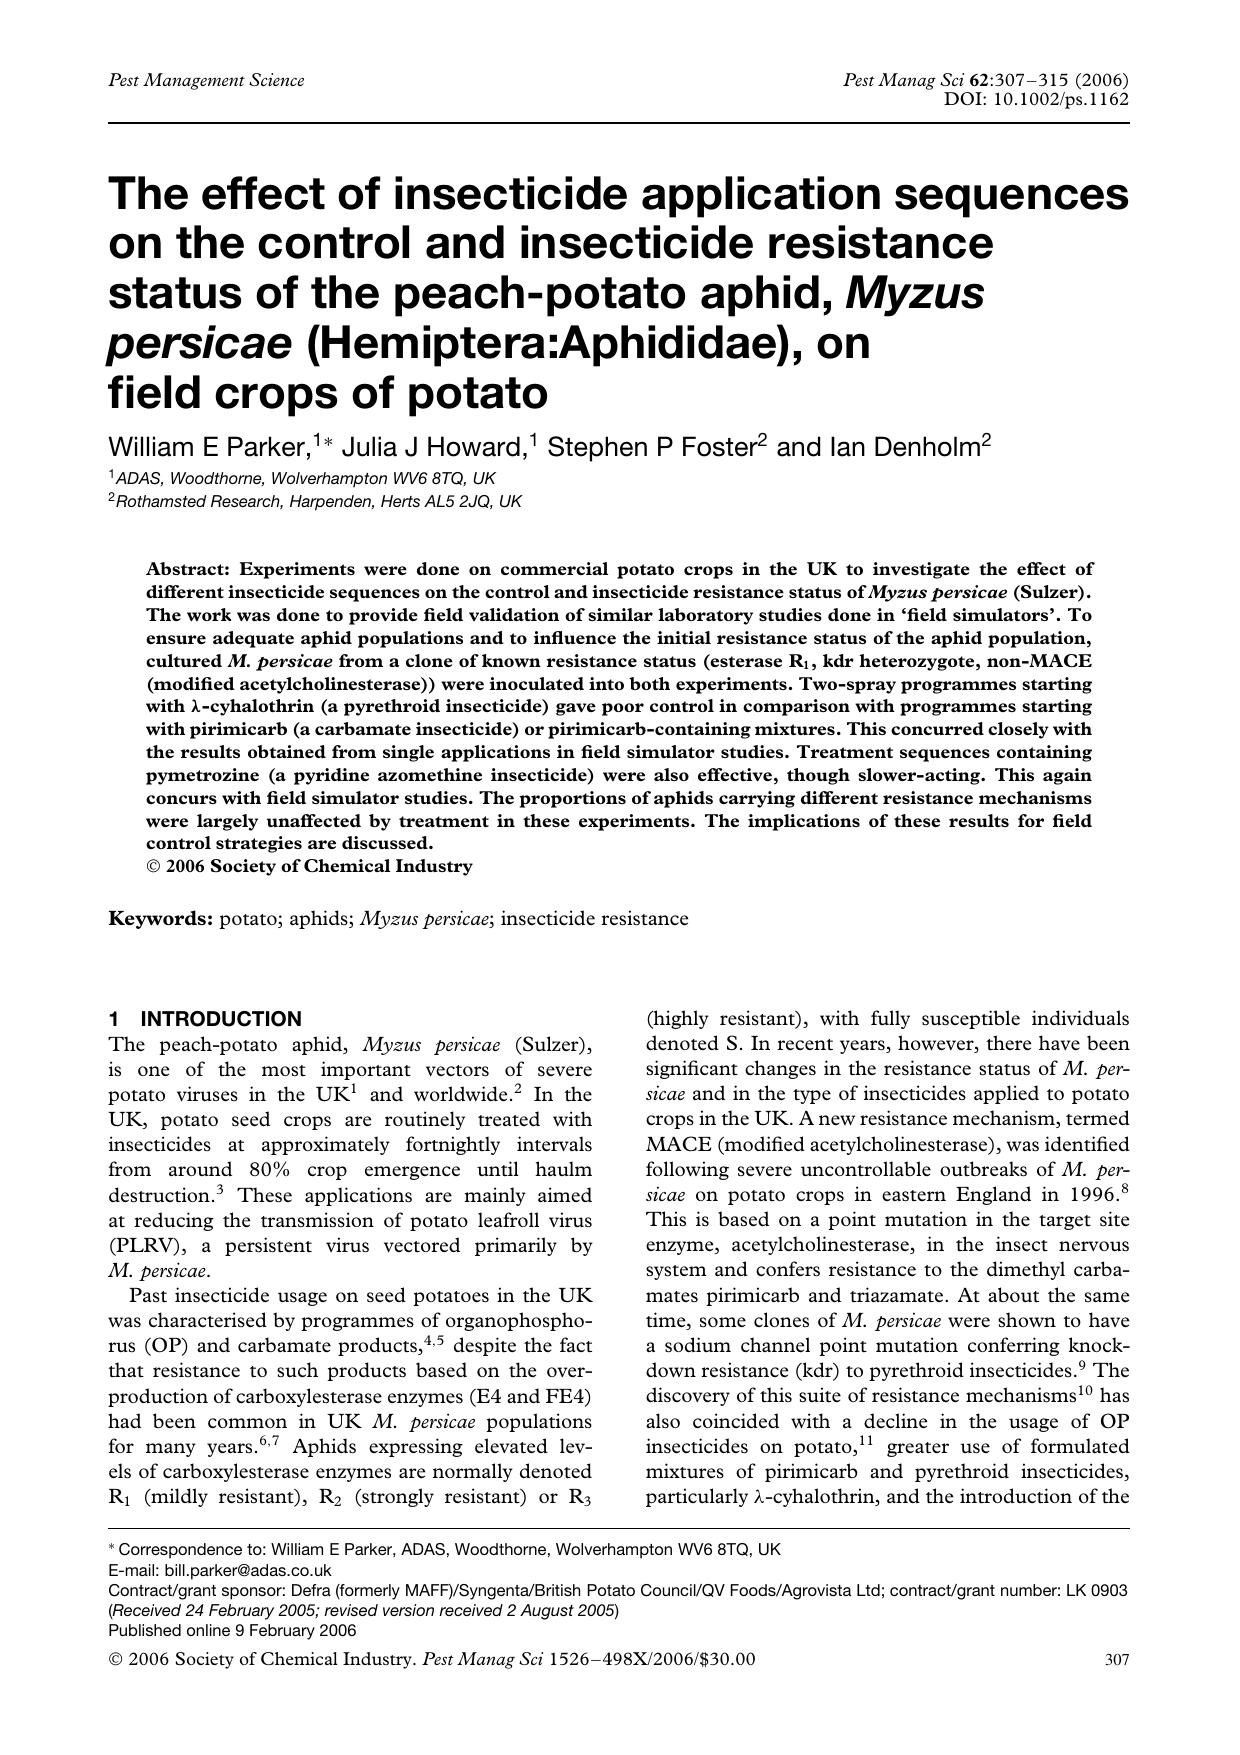 The effect of insecticide application sequences on the control and insecticide resistance status of the peach-potato aphid, Myzus persicae (Hemiptera:Aphididae), on field crops of potato by Unknown